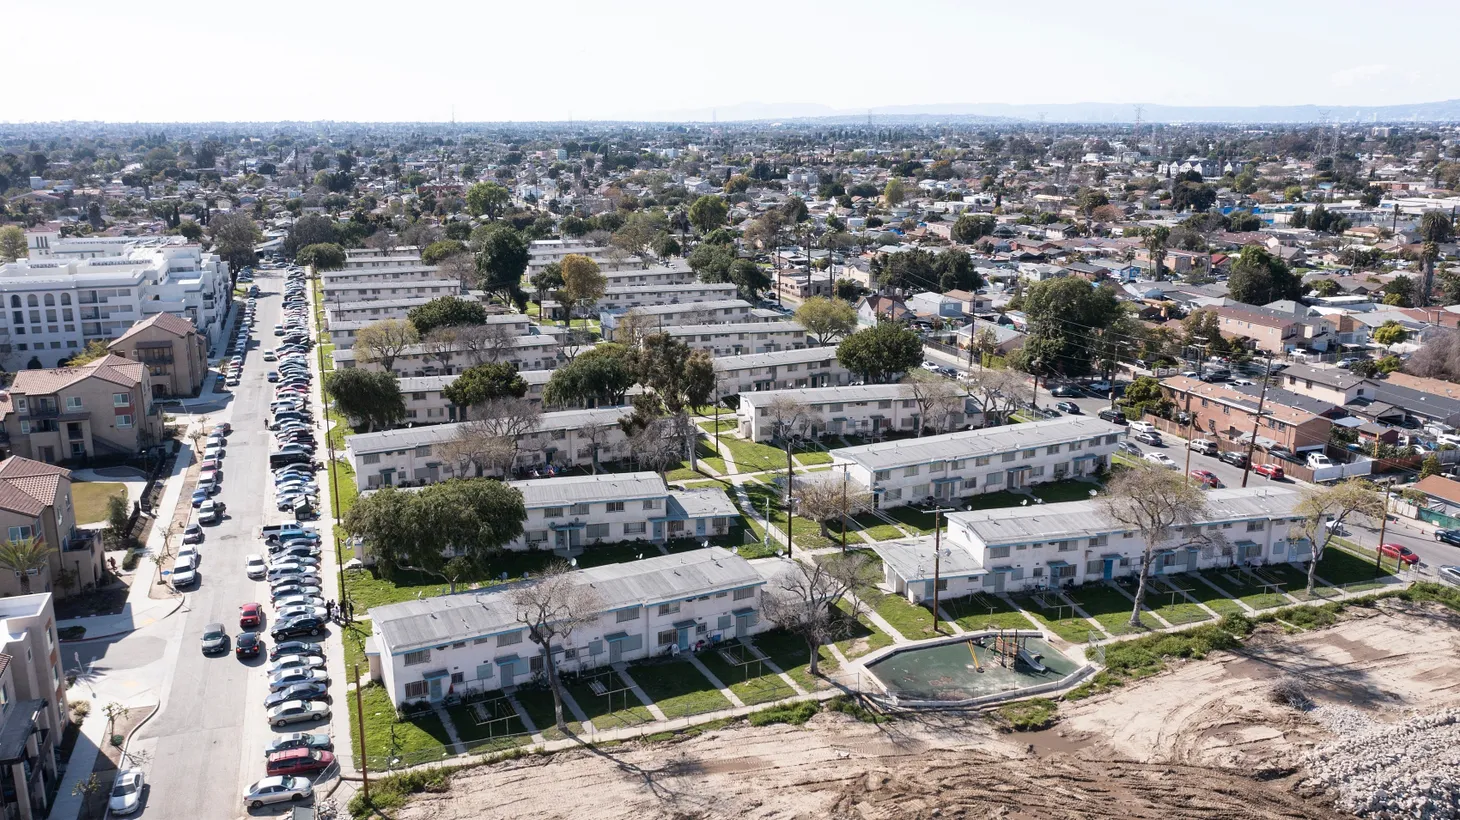 An aerial view shows historic public housing projects in Watts, California.